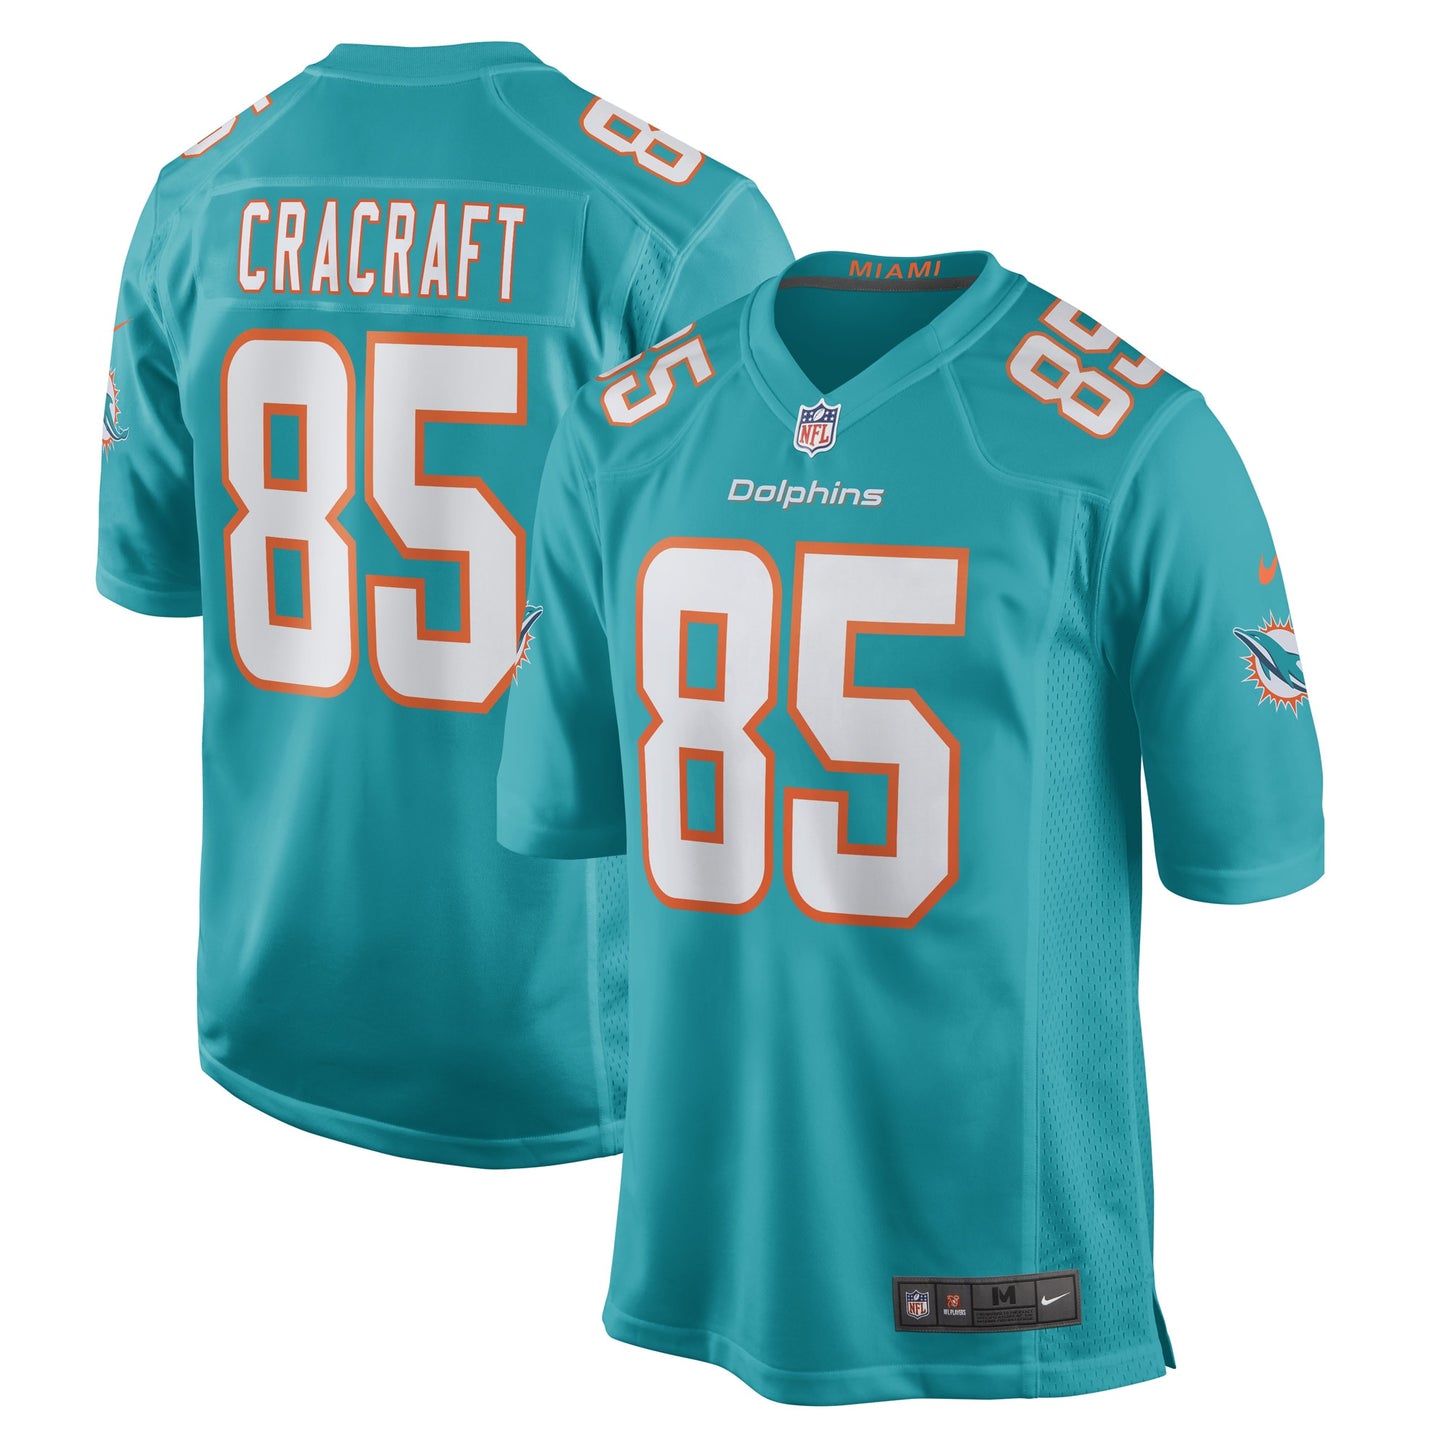 River Cracraft Miami Dolphins Nike Game Player Jersey - Aqua